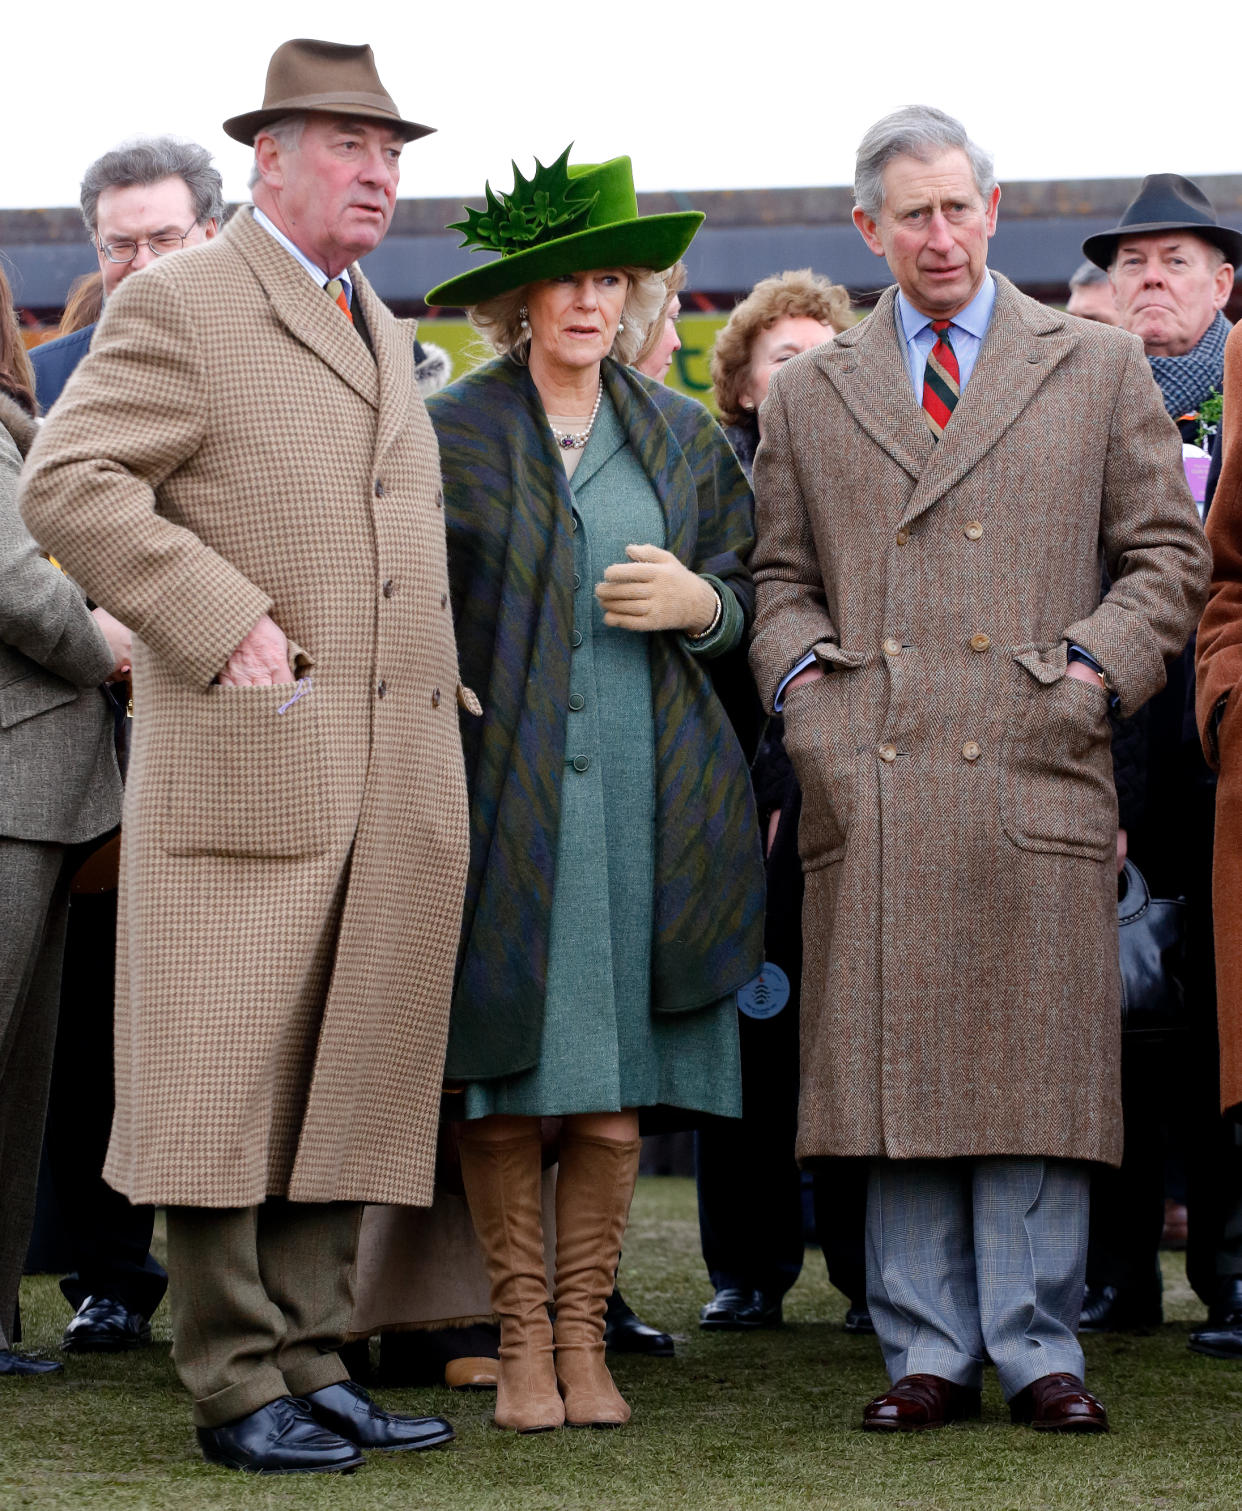 CHELTENHAM, UNITED KINGDOM - MARCH 17: (EMBARGOED FOR PUBLICATION IN UK NEWSPAPERS UNTIL 24 HOURS AFTER CREATE DATE AND TIME) Lord Samuel Vestey, Camilla, Duchess of Cornwall (wearing a St Patrick's Day themed hat adorned with shamrocks, designed by Philip Treacy) and Prince Charles, Prince of Wales attend day 4 'Gold Cup Day' of the Cheltenham Festival at Cheltenham Racecourse on March 17, 2006 in Cheltenham, England. (Photo by Max Mumby/Indigo/Getty Images)